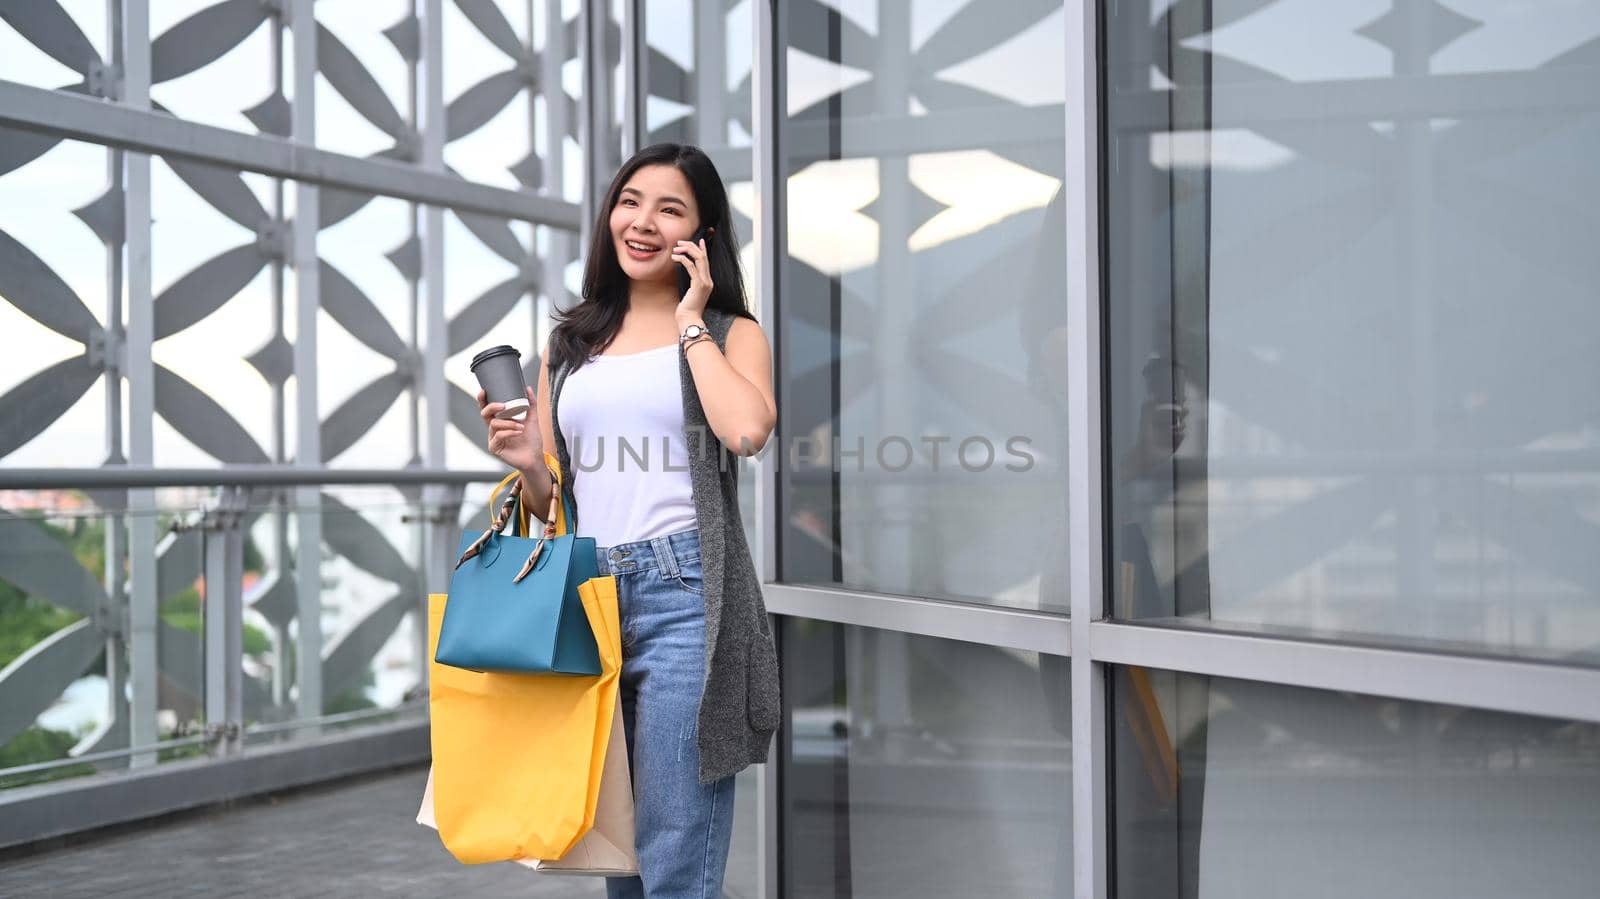 Stylish young woman with shopping bags and talking on mobile phone, walking outside shopping mall.